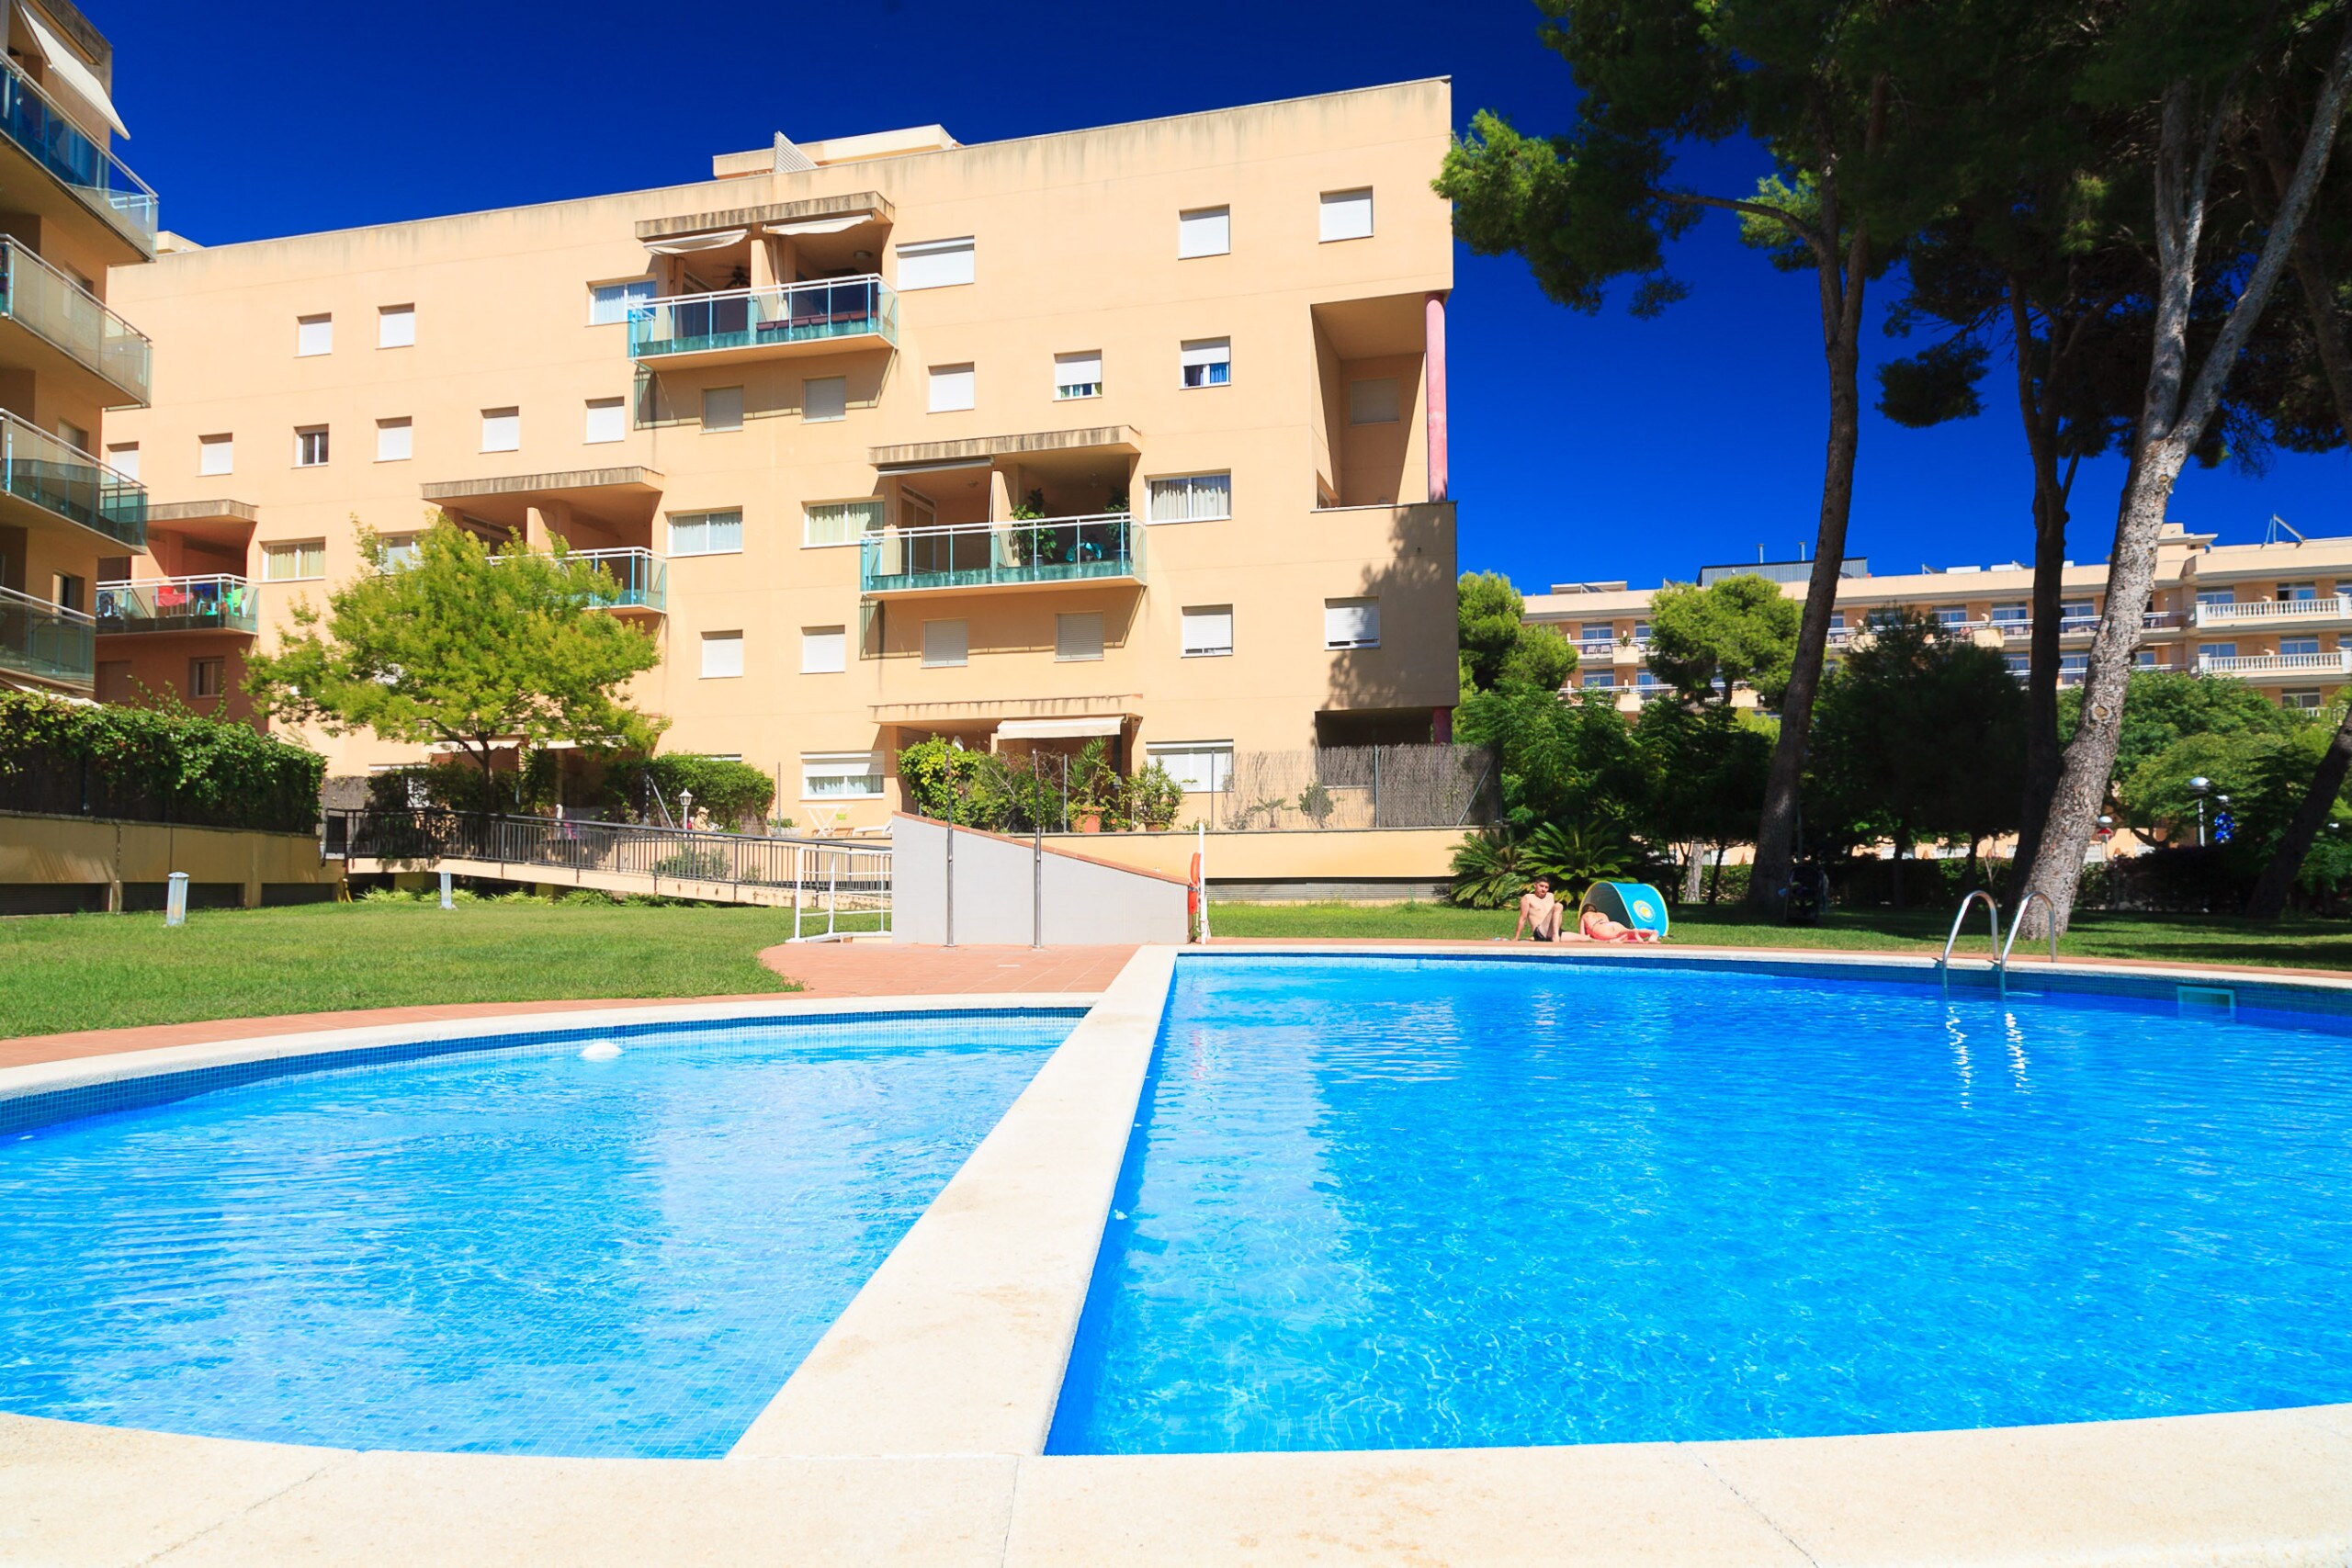 Property Image 1 - Excellent apartment with pool located 300m from the beach in Salou